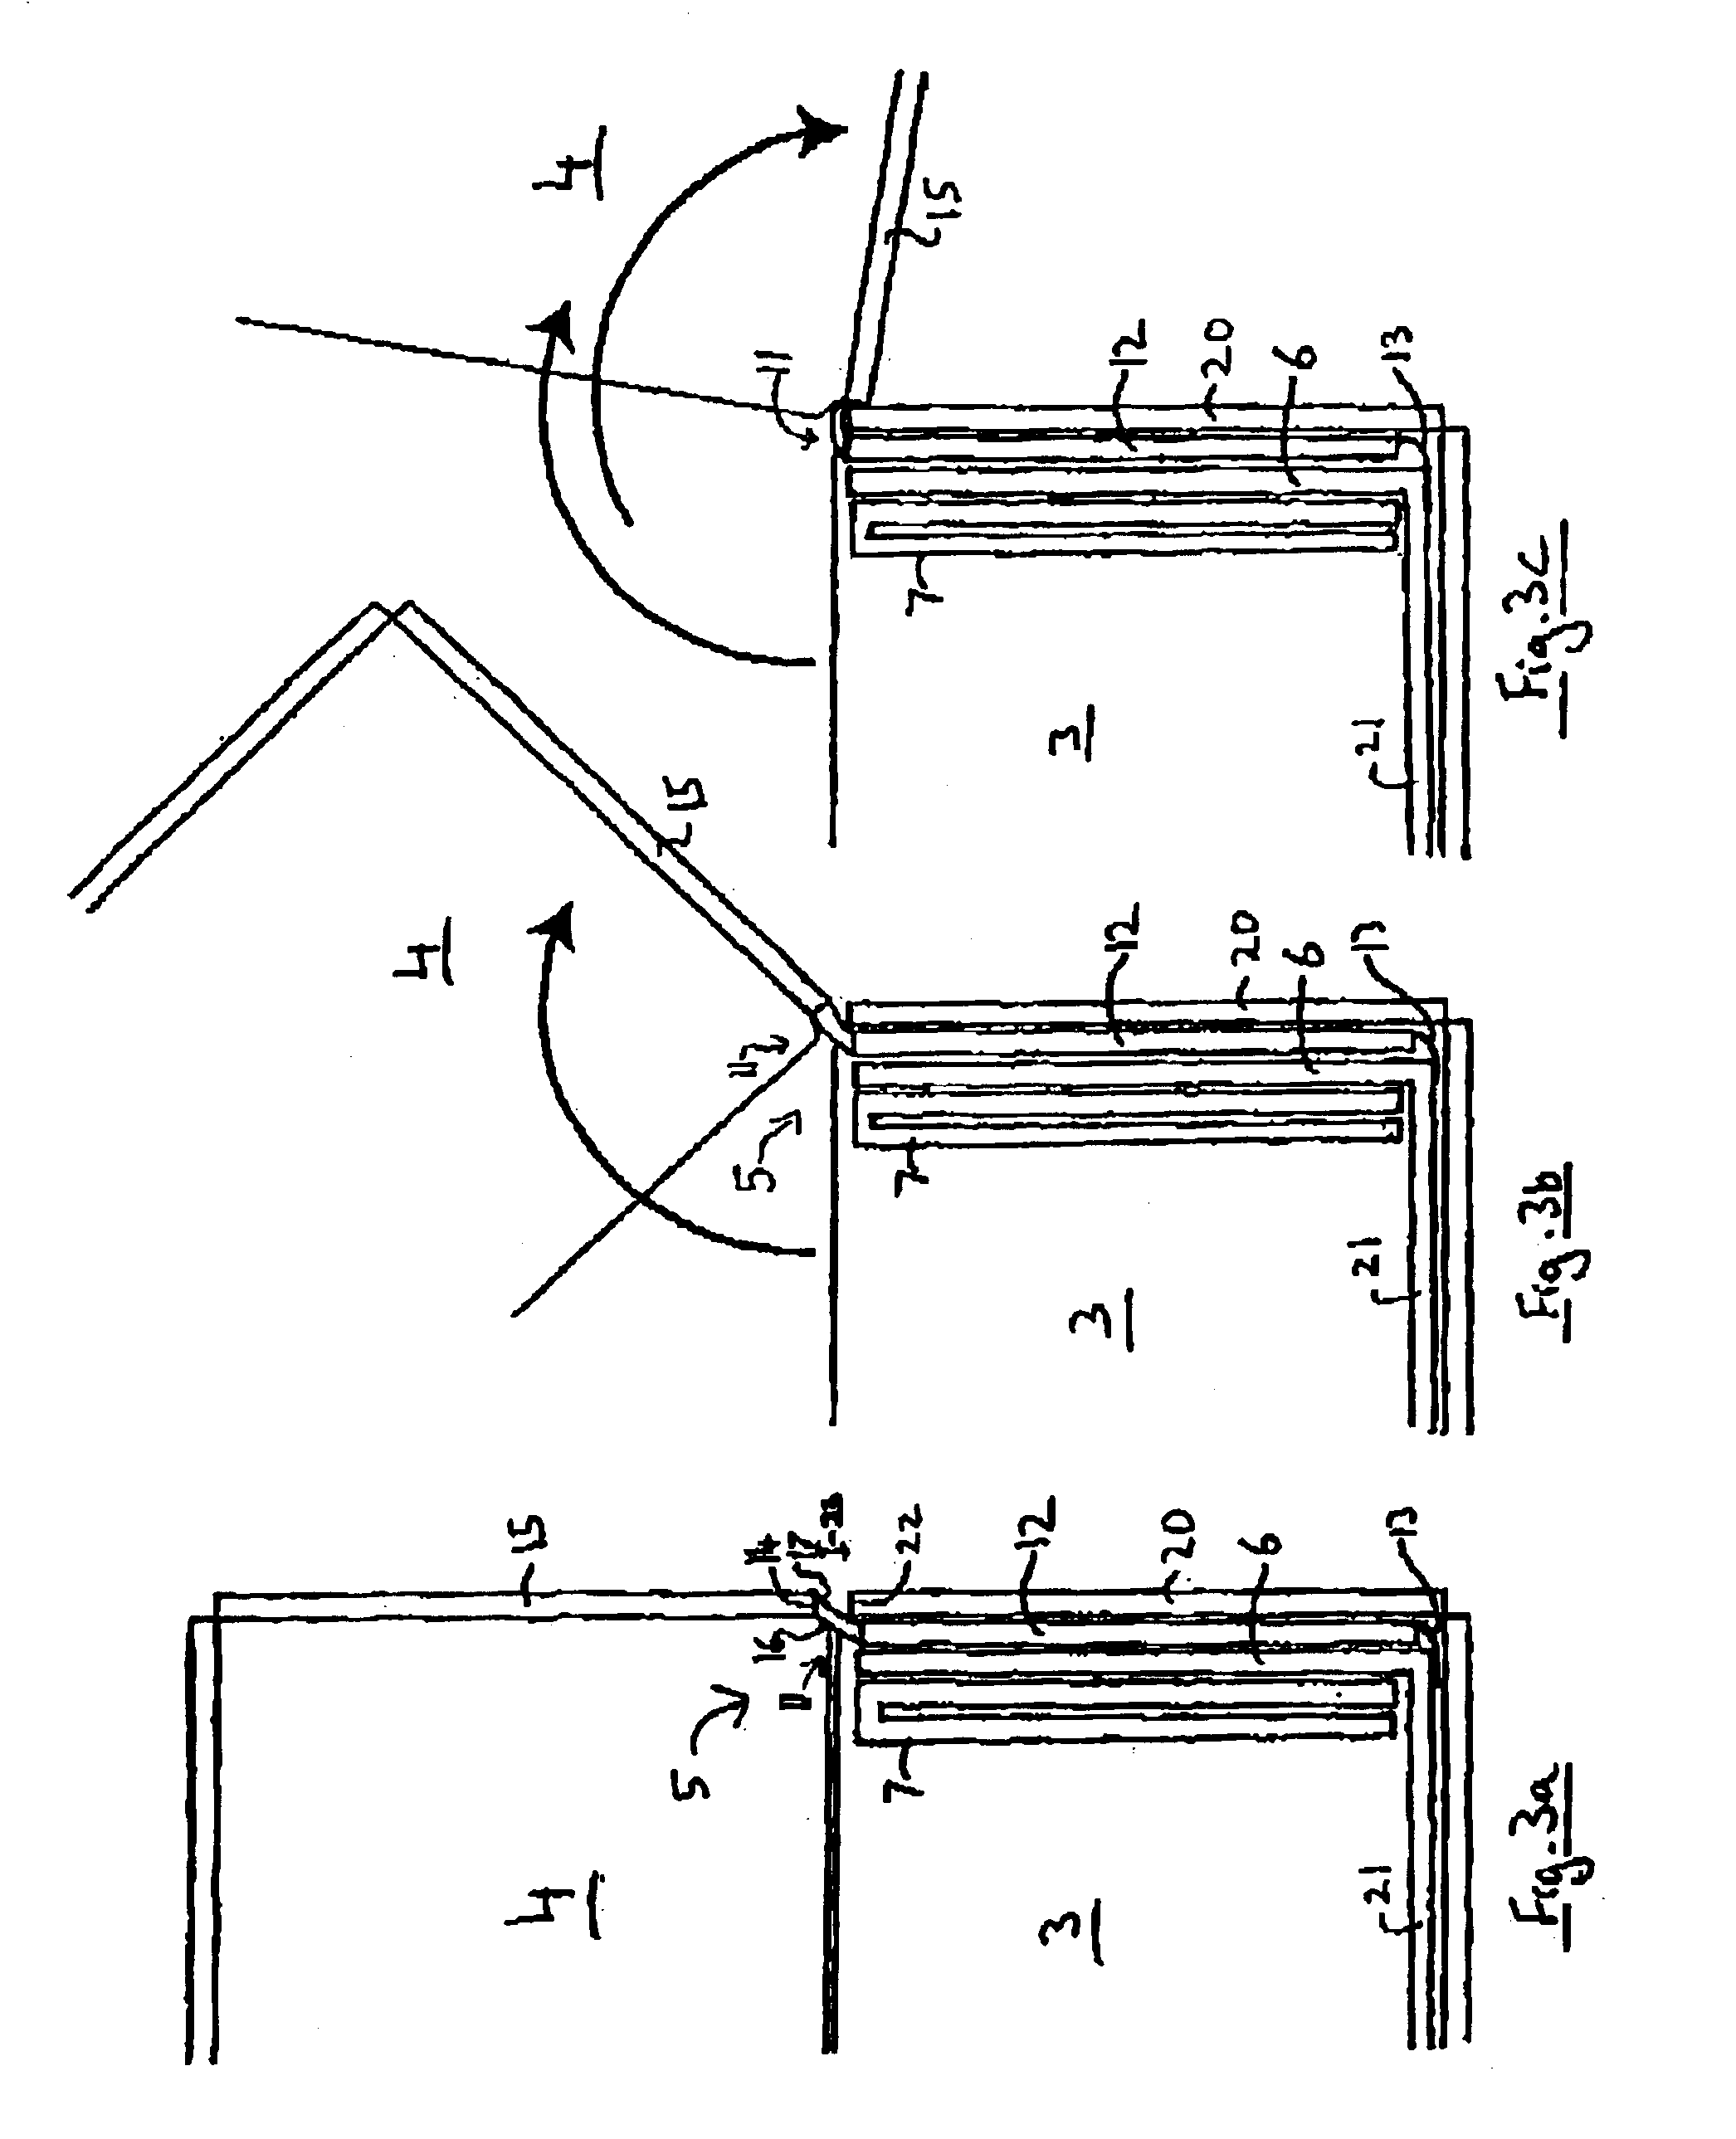 Display box having a hinge including a flexible and rigid portion